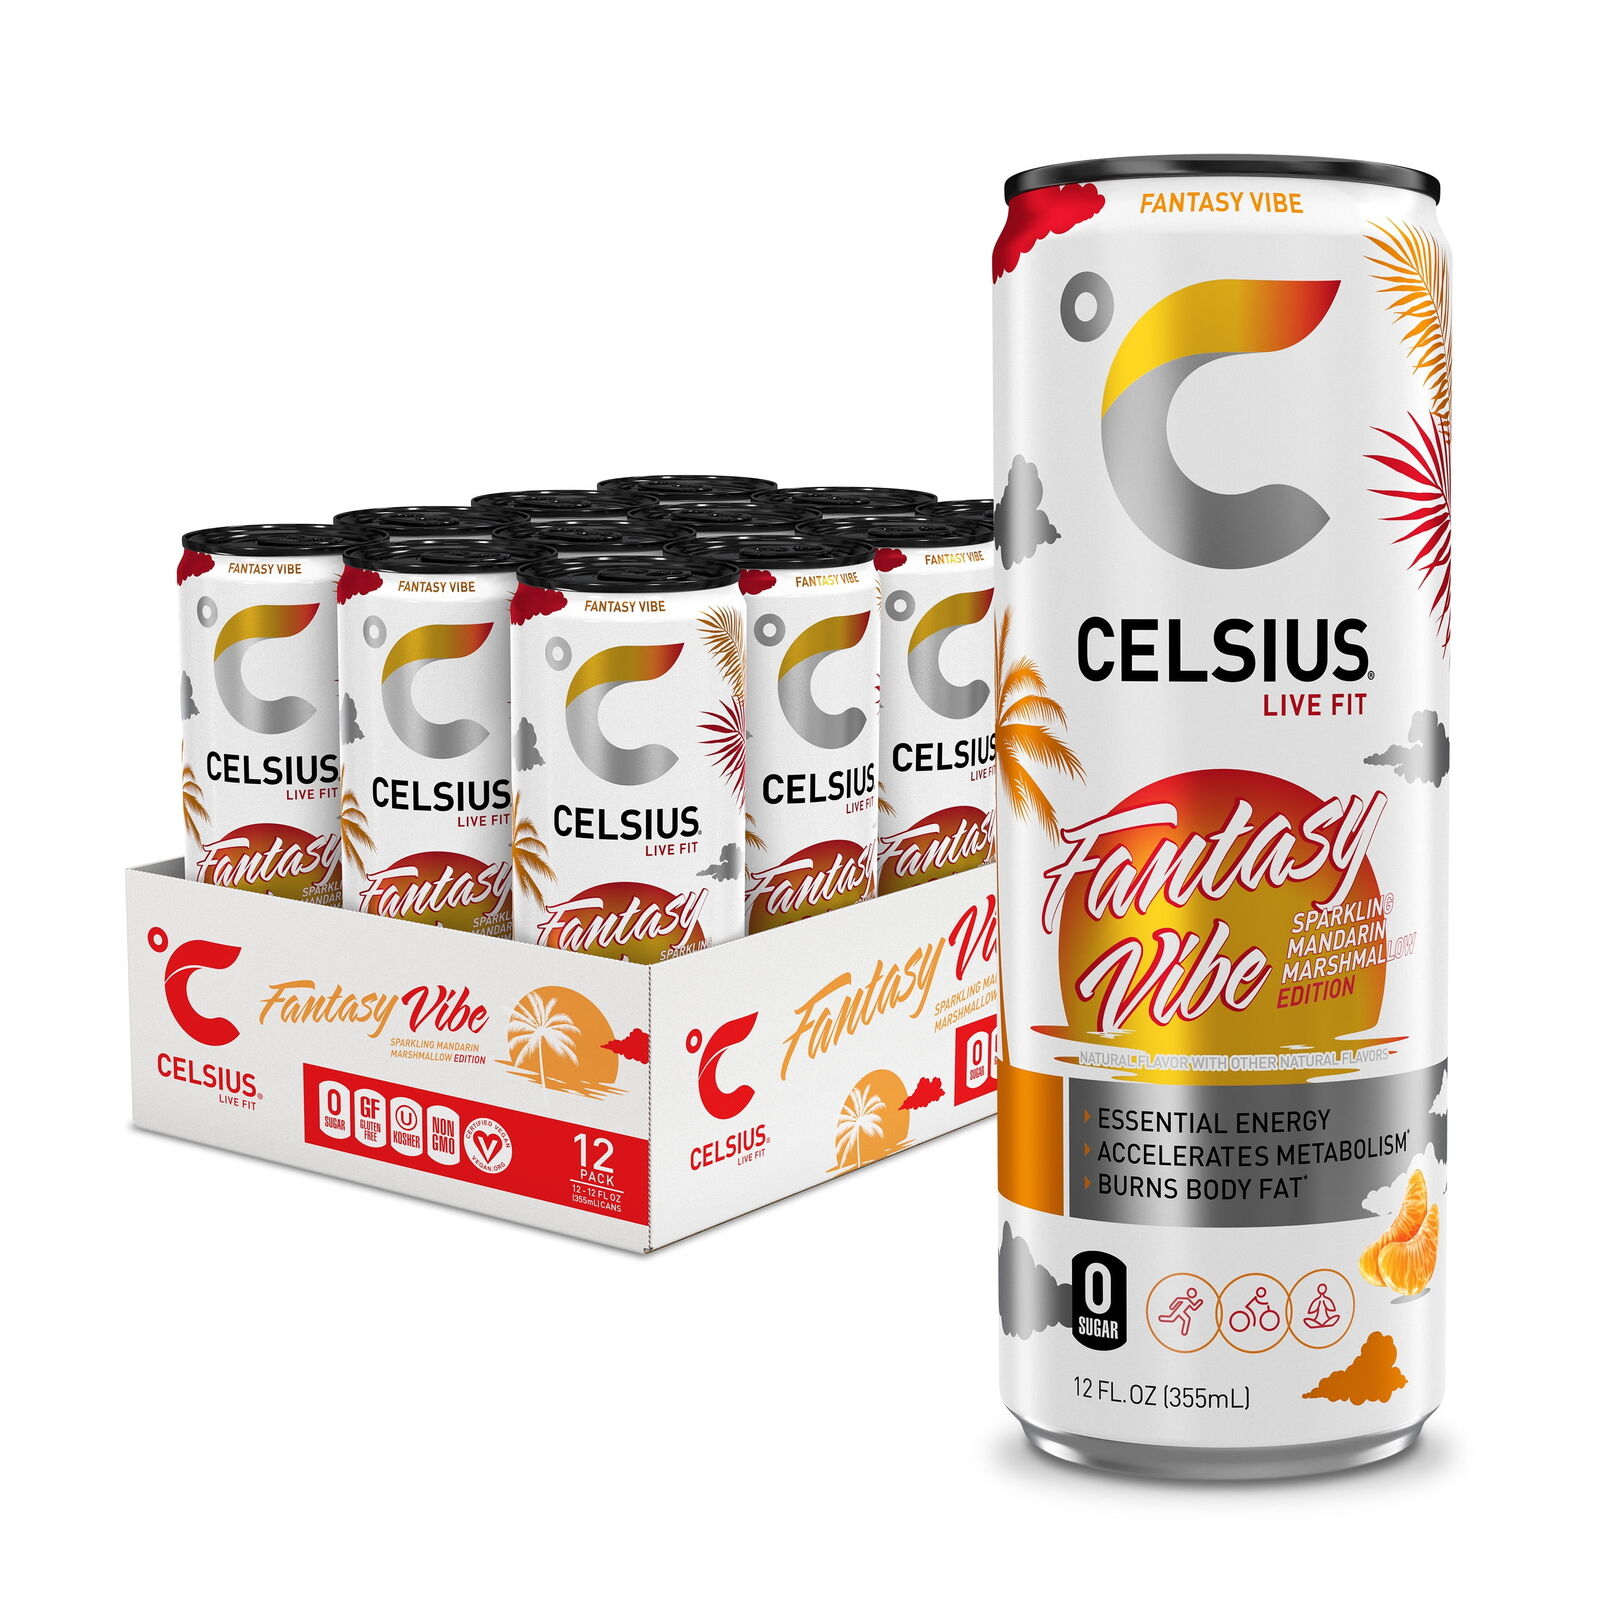 CELSIUS Sparkling Fantasy Vibe, Functional Essential Energy Drink 12 fl oz Can